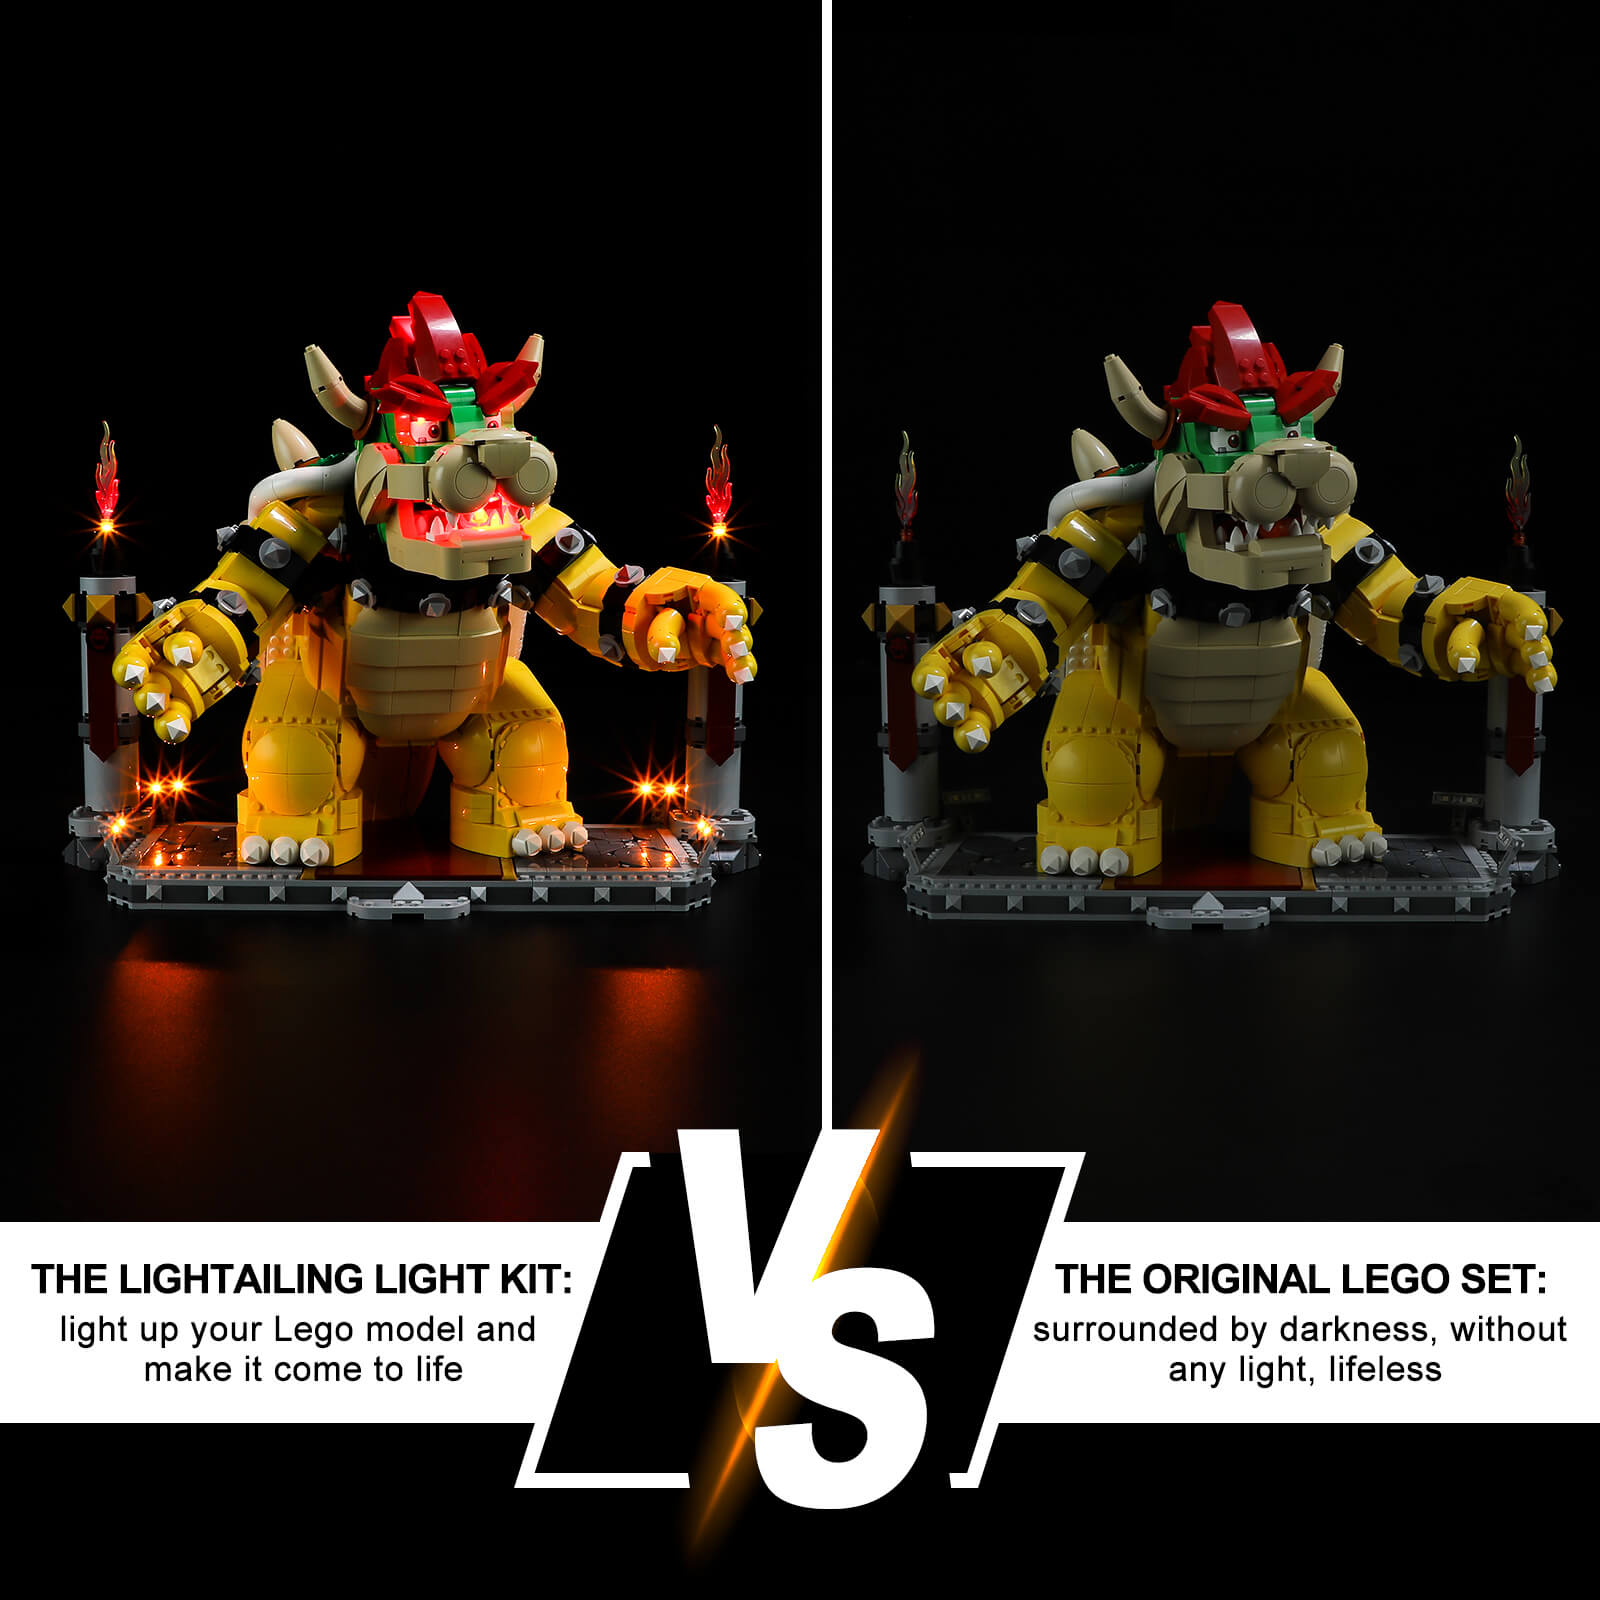 Lego 71411 The Mighty Bowser night mode